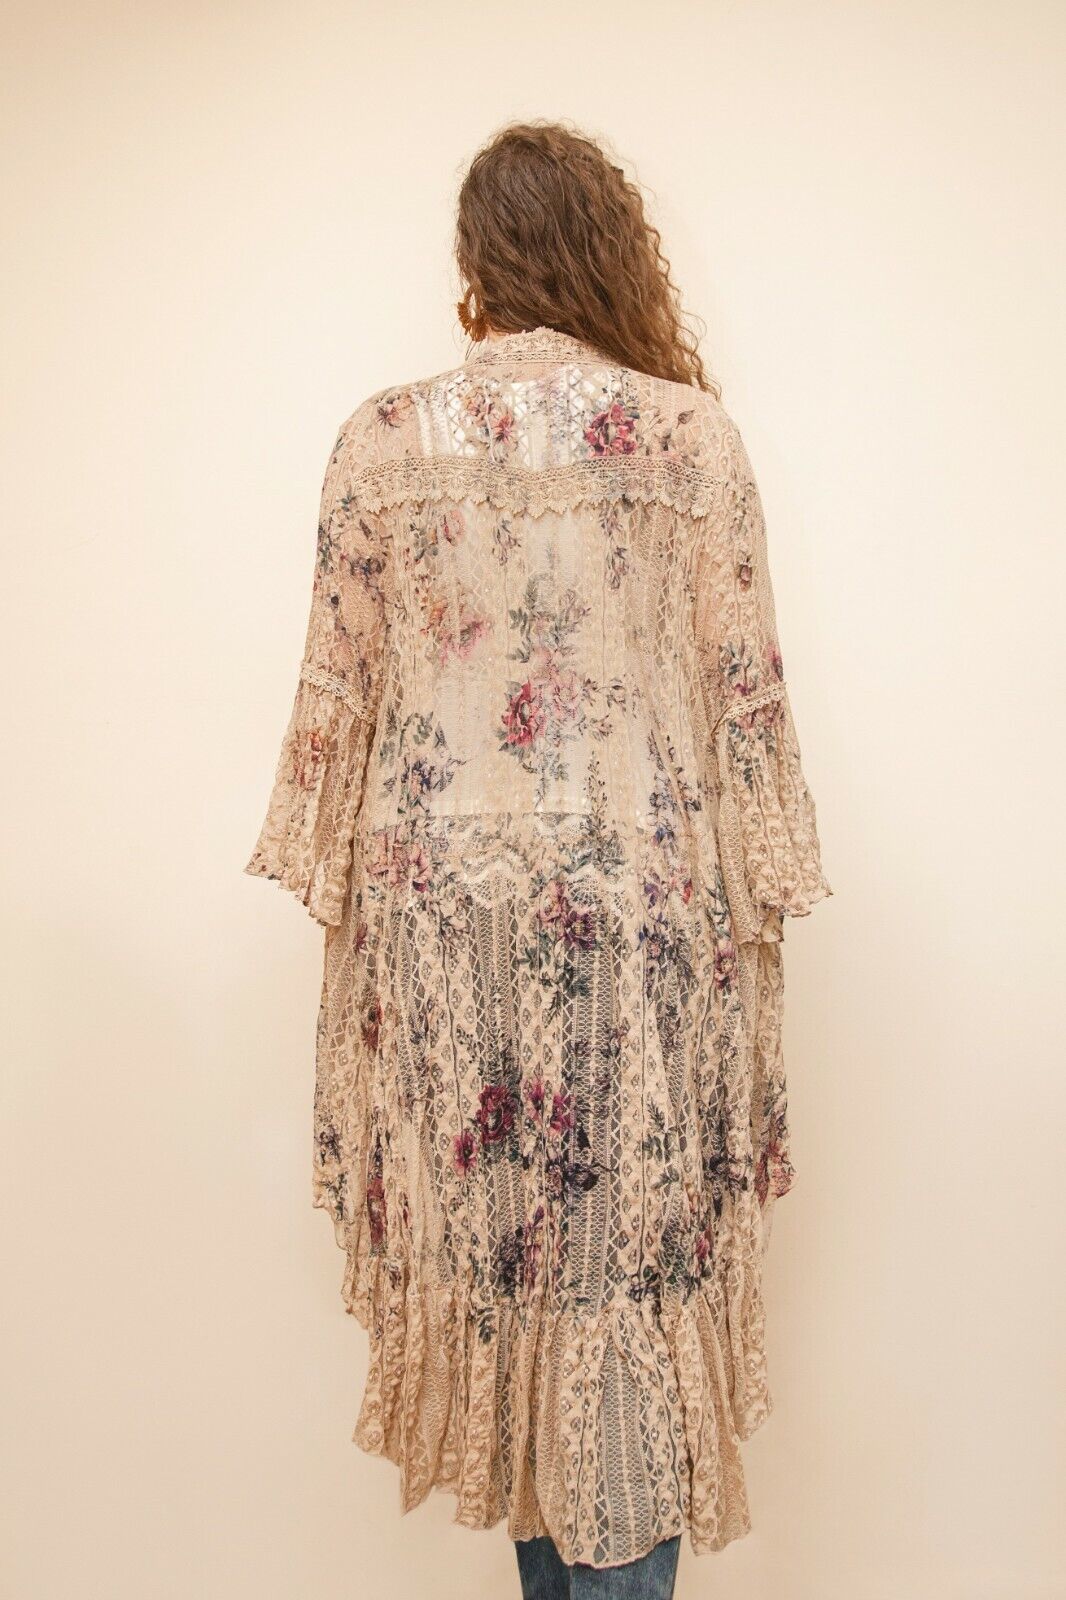 Bright Day - Bohemian Embroidered Floral Lace Duster - - Yippie Vibe